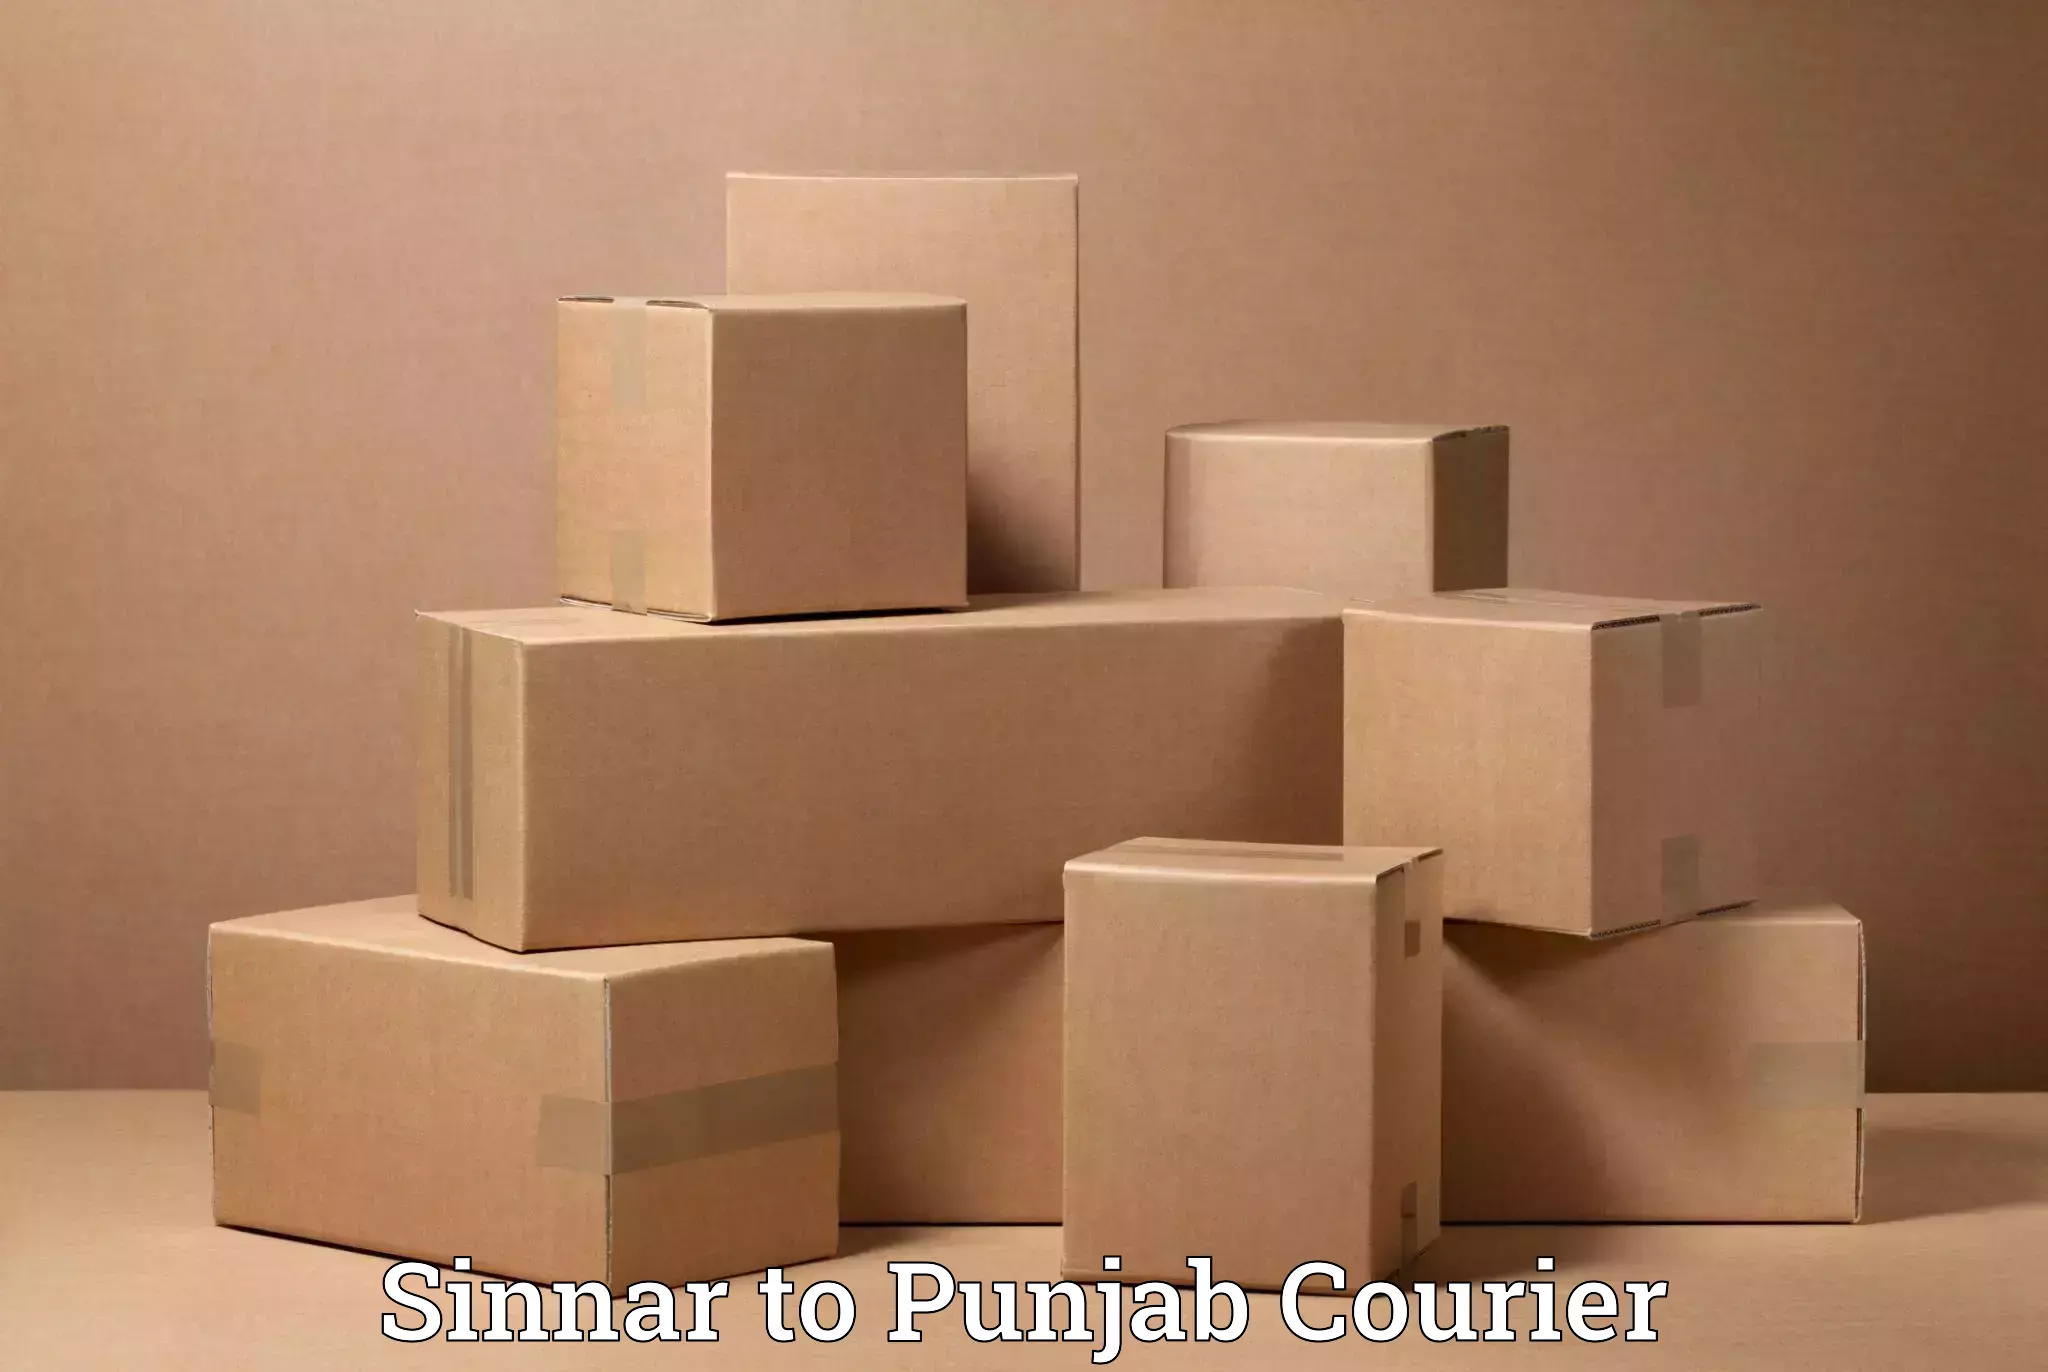 Moving and handling services Sinnar to Punjab